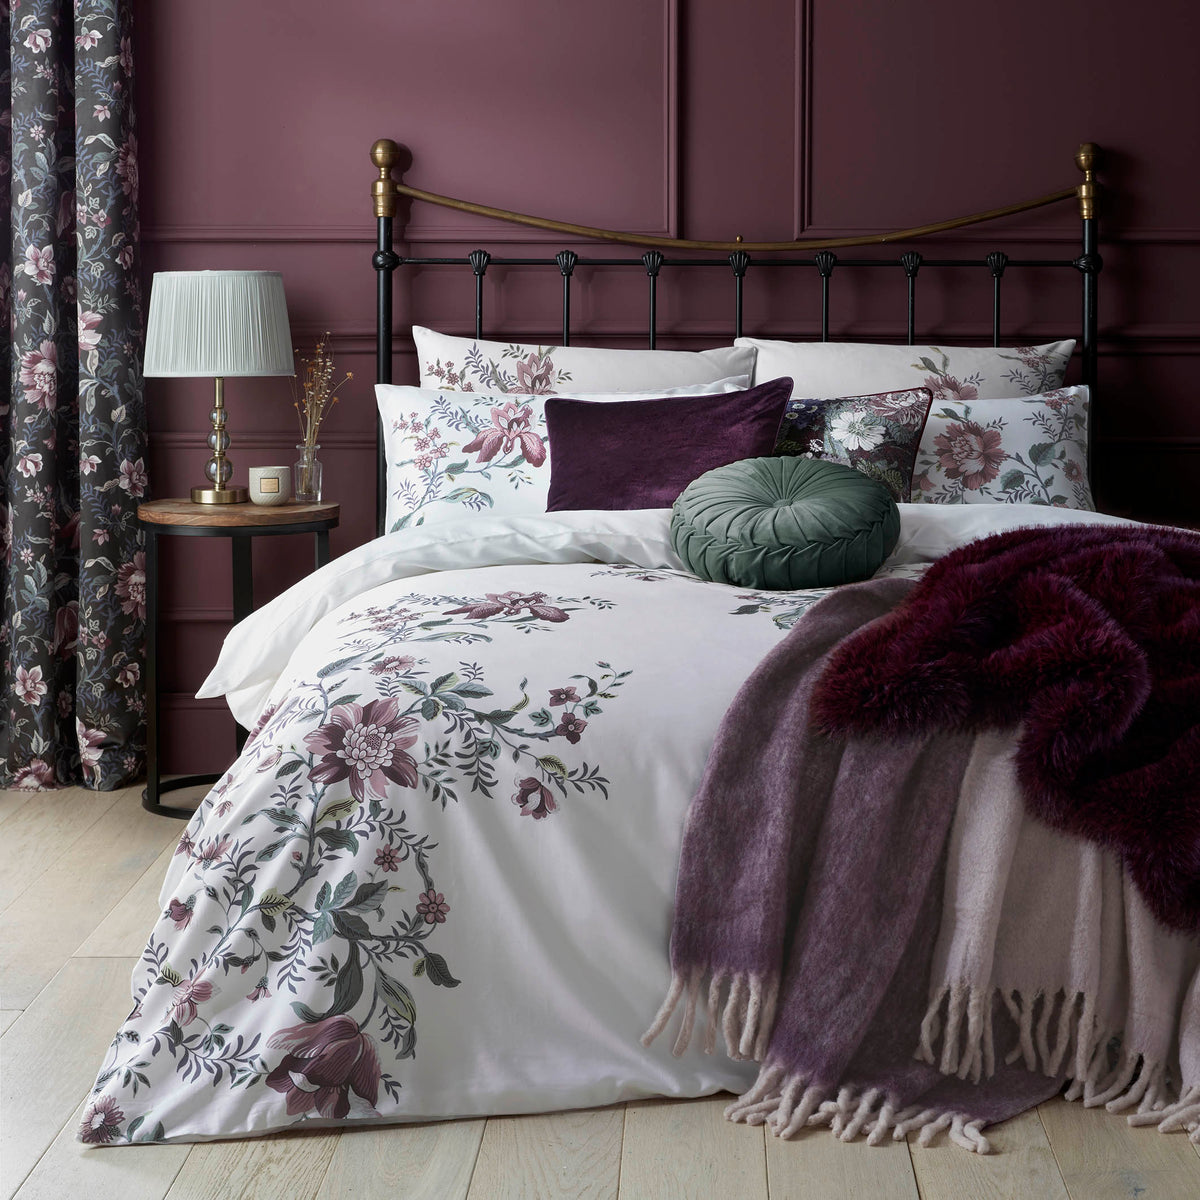 Editas Garden duvet set by Laura Ashley in a floral purple and blackberry design, with a white background its great for an all year round look